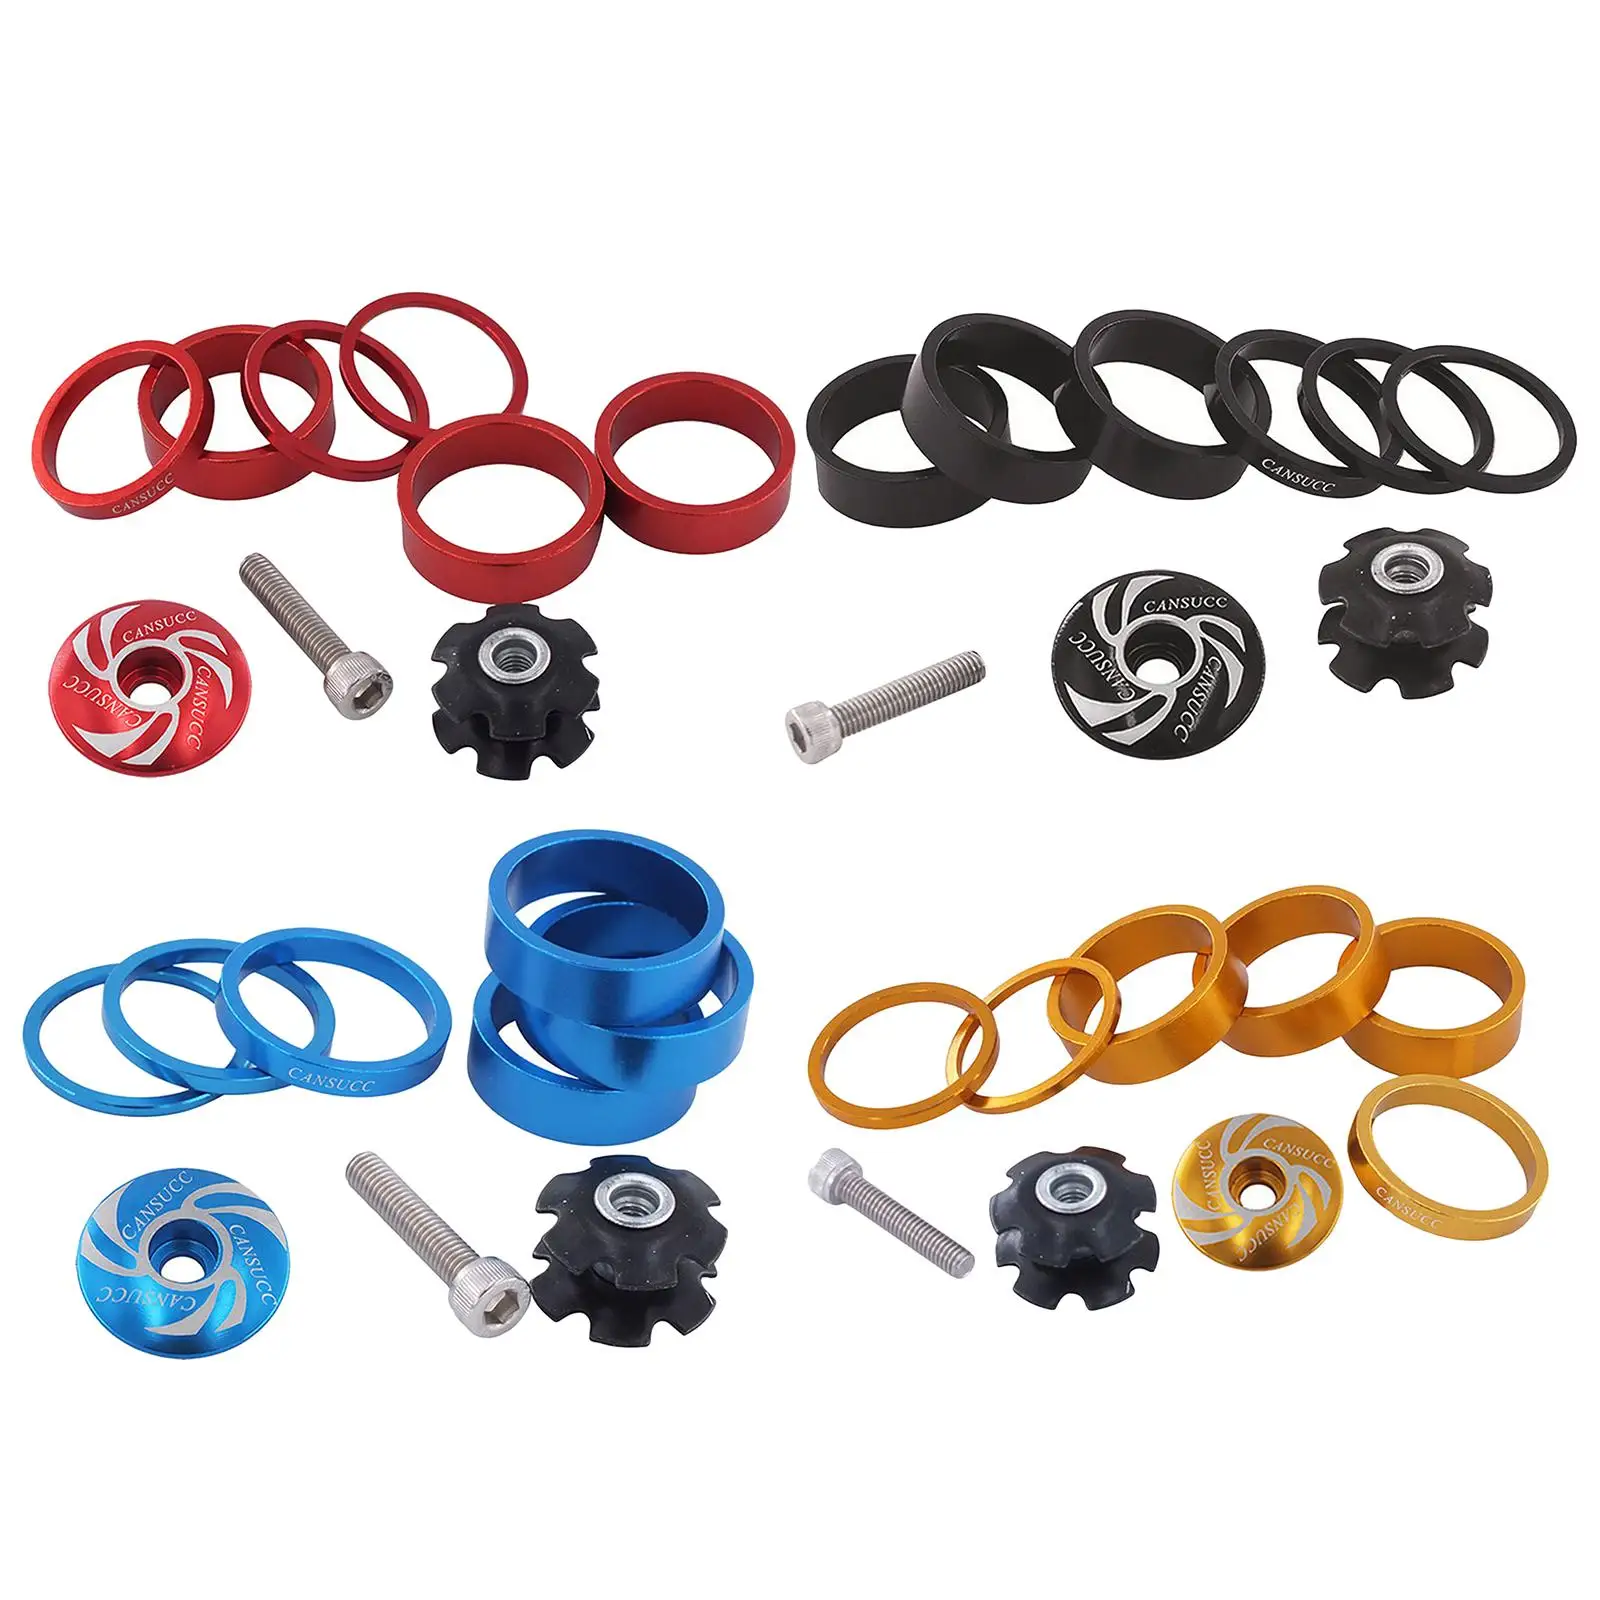 1 1/8 Inch Bicycle Headset Spacer with Headset Top   Headset  Set